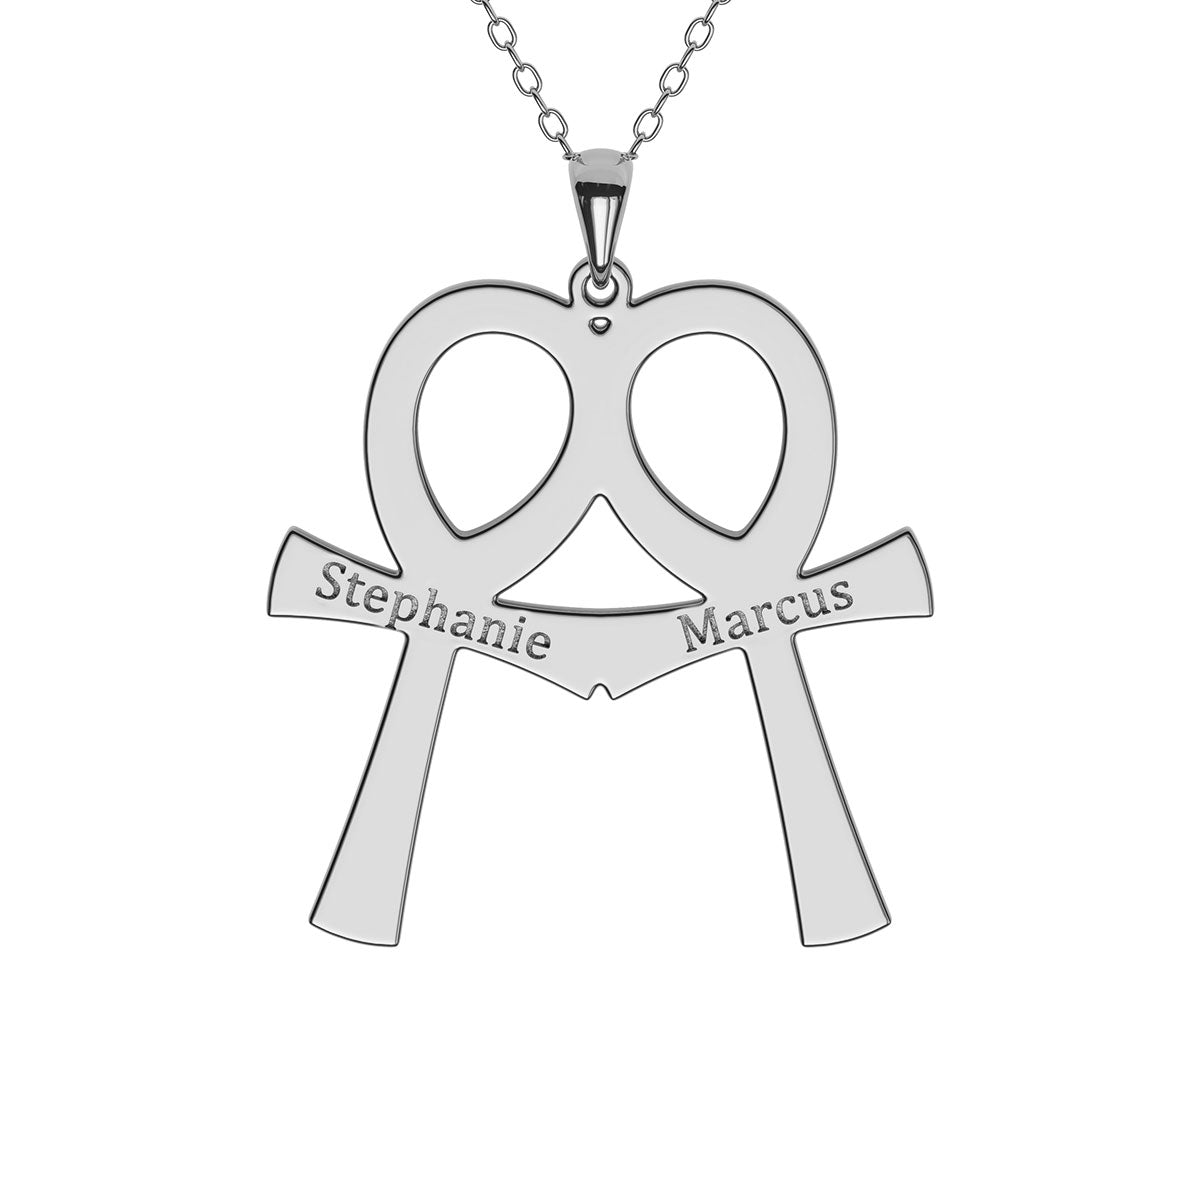 Double Ankh Egyptian Cross Necklace With Personalized Engraving